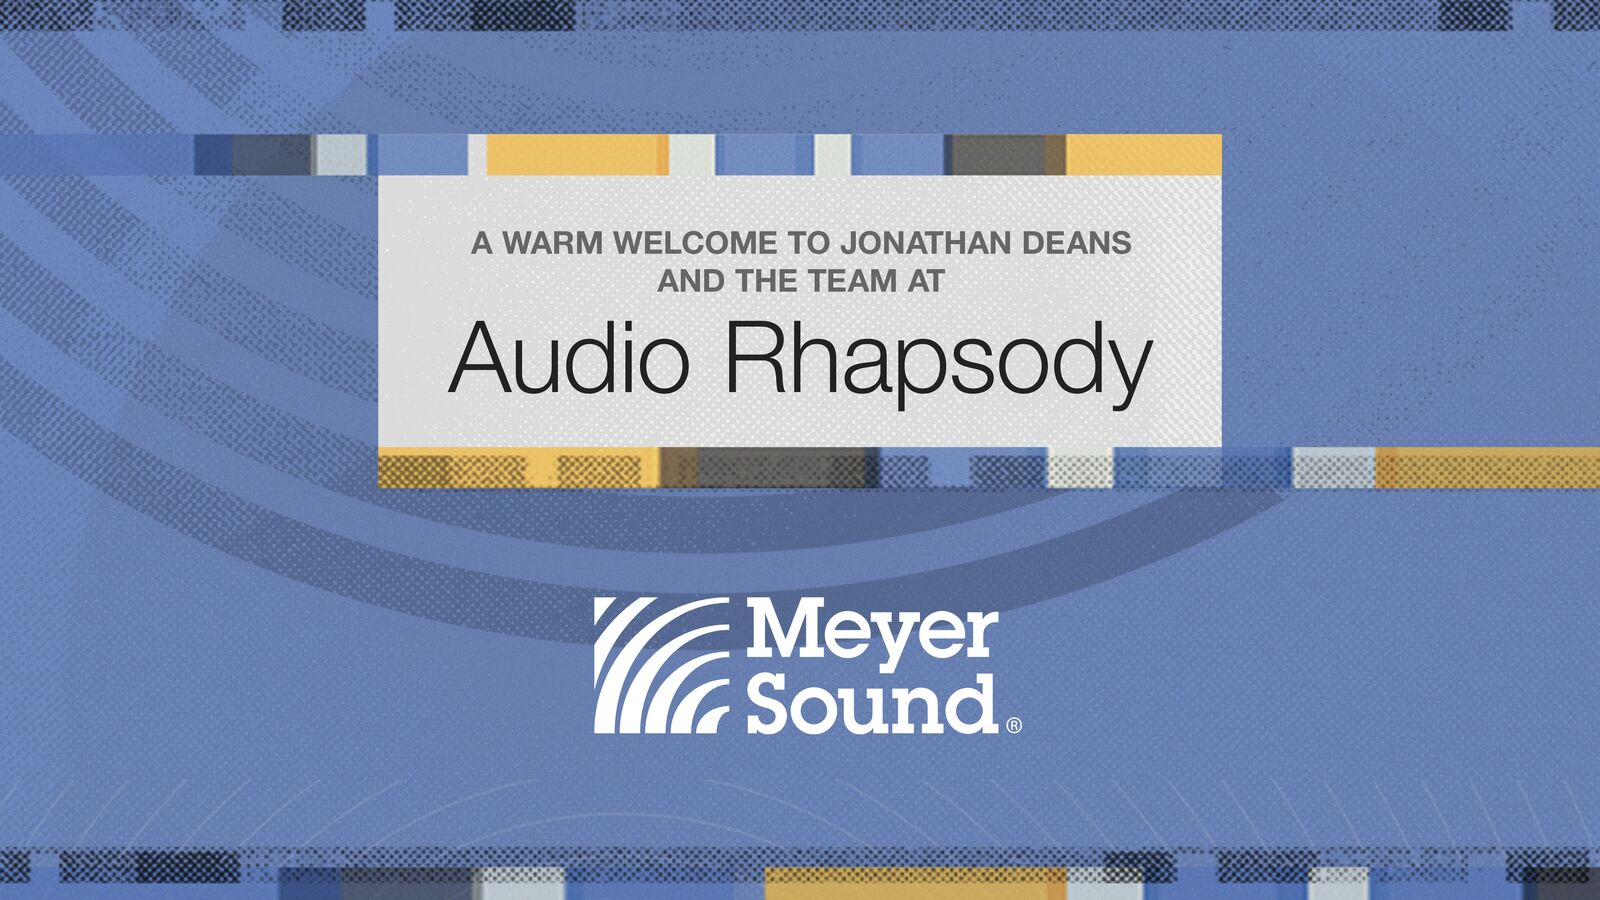 Meyer Sound Acquires Audio Rhapsody Led by Acclaimed Sound Designer Jonathan Deans